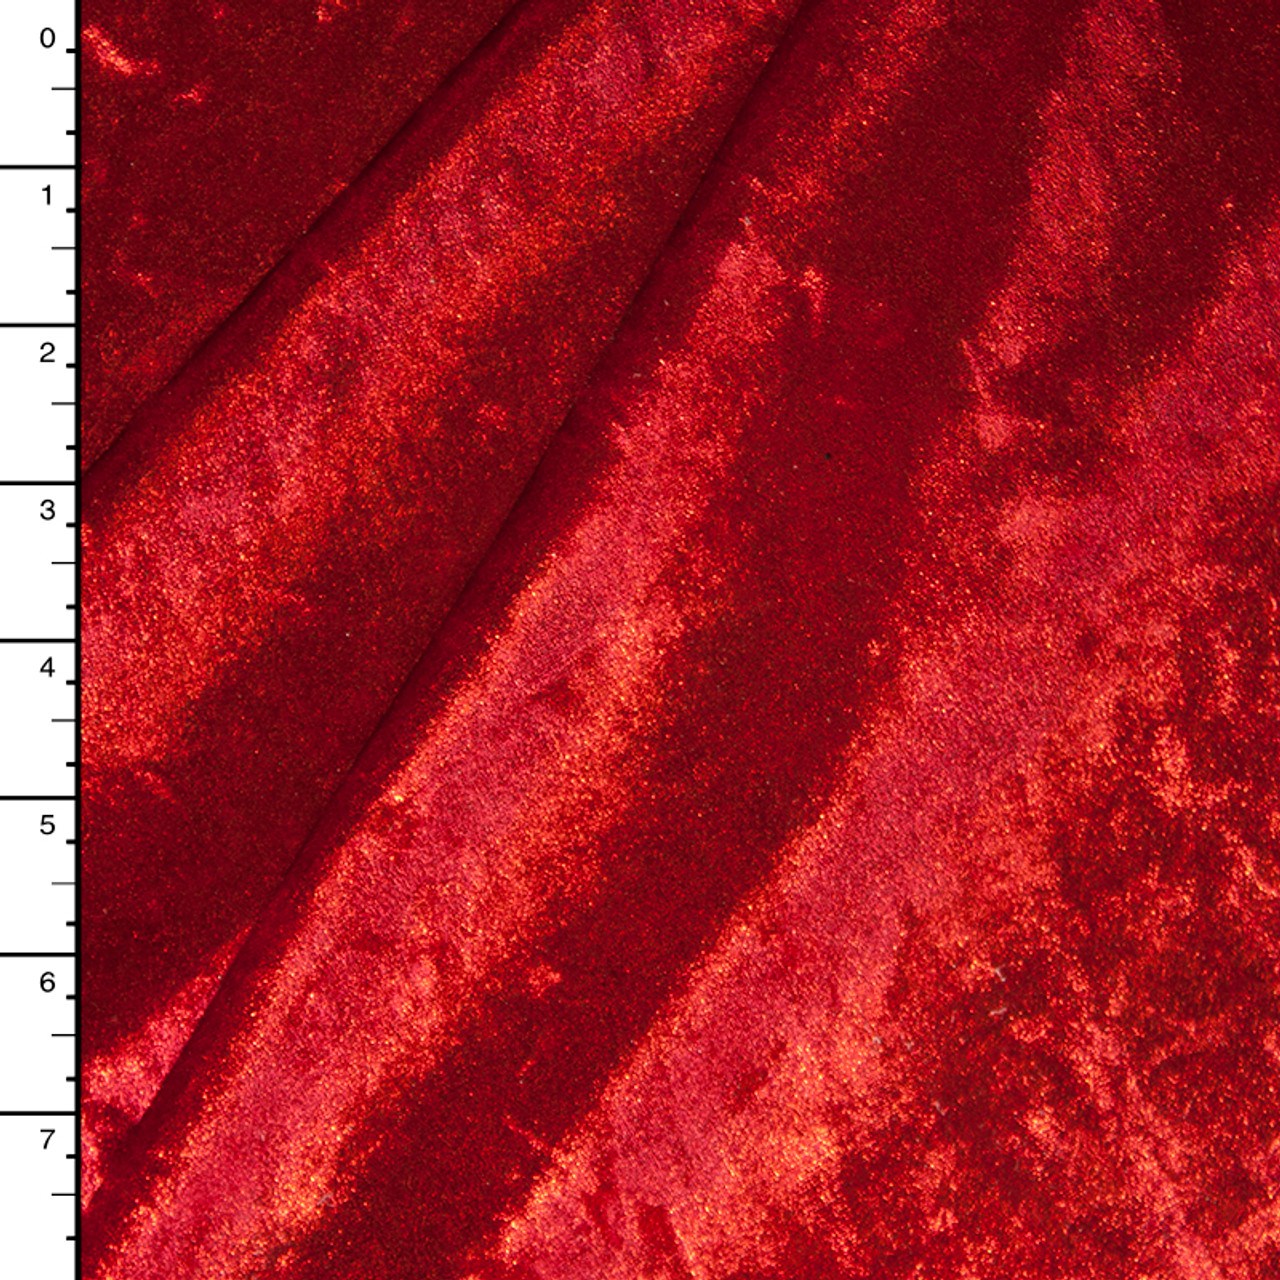 Cali Fabrics Red Luxury Crushed Stretch Velvet Fabric by the Yard